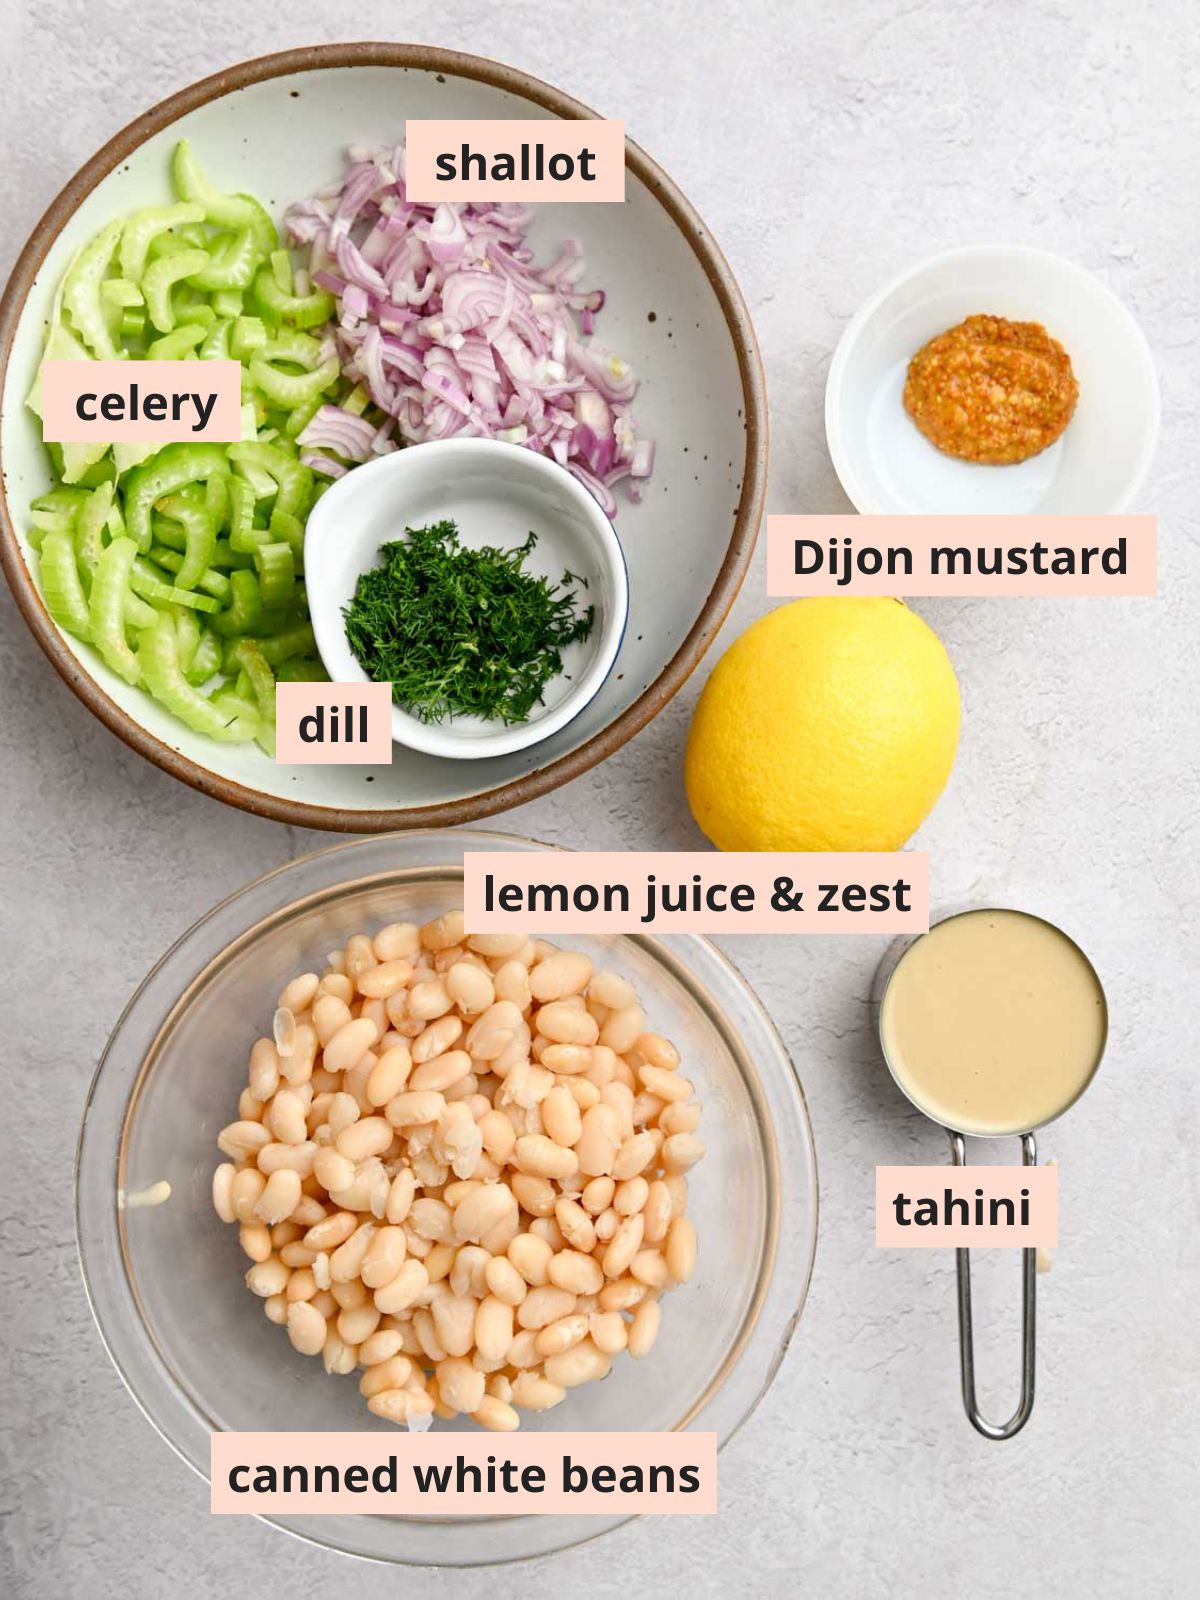 Labeled ingredients used to make white bean salad.